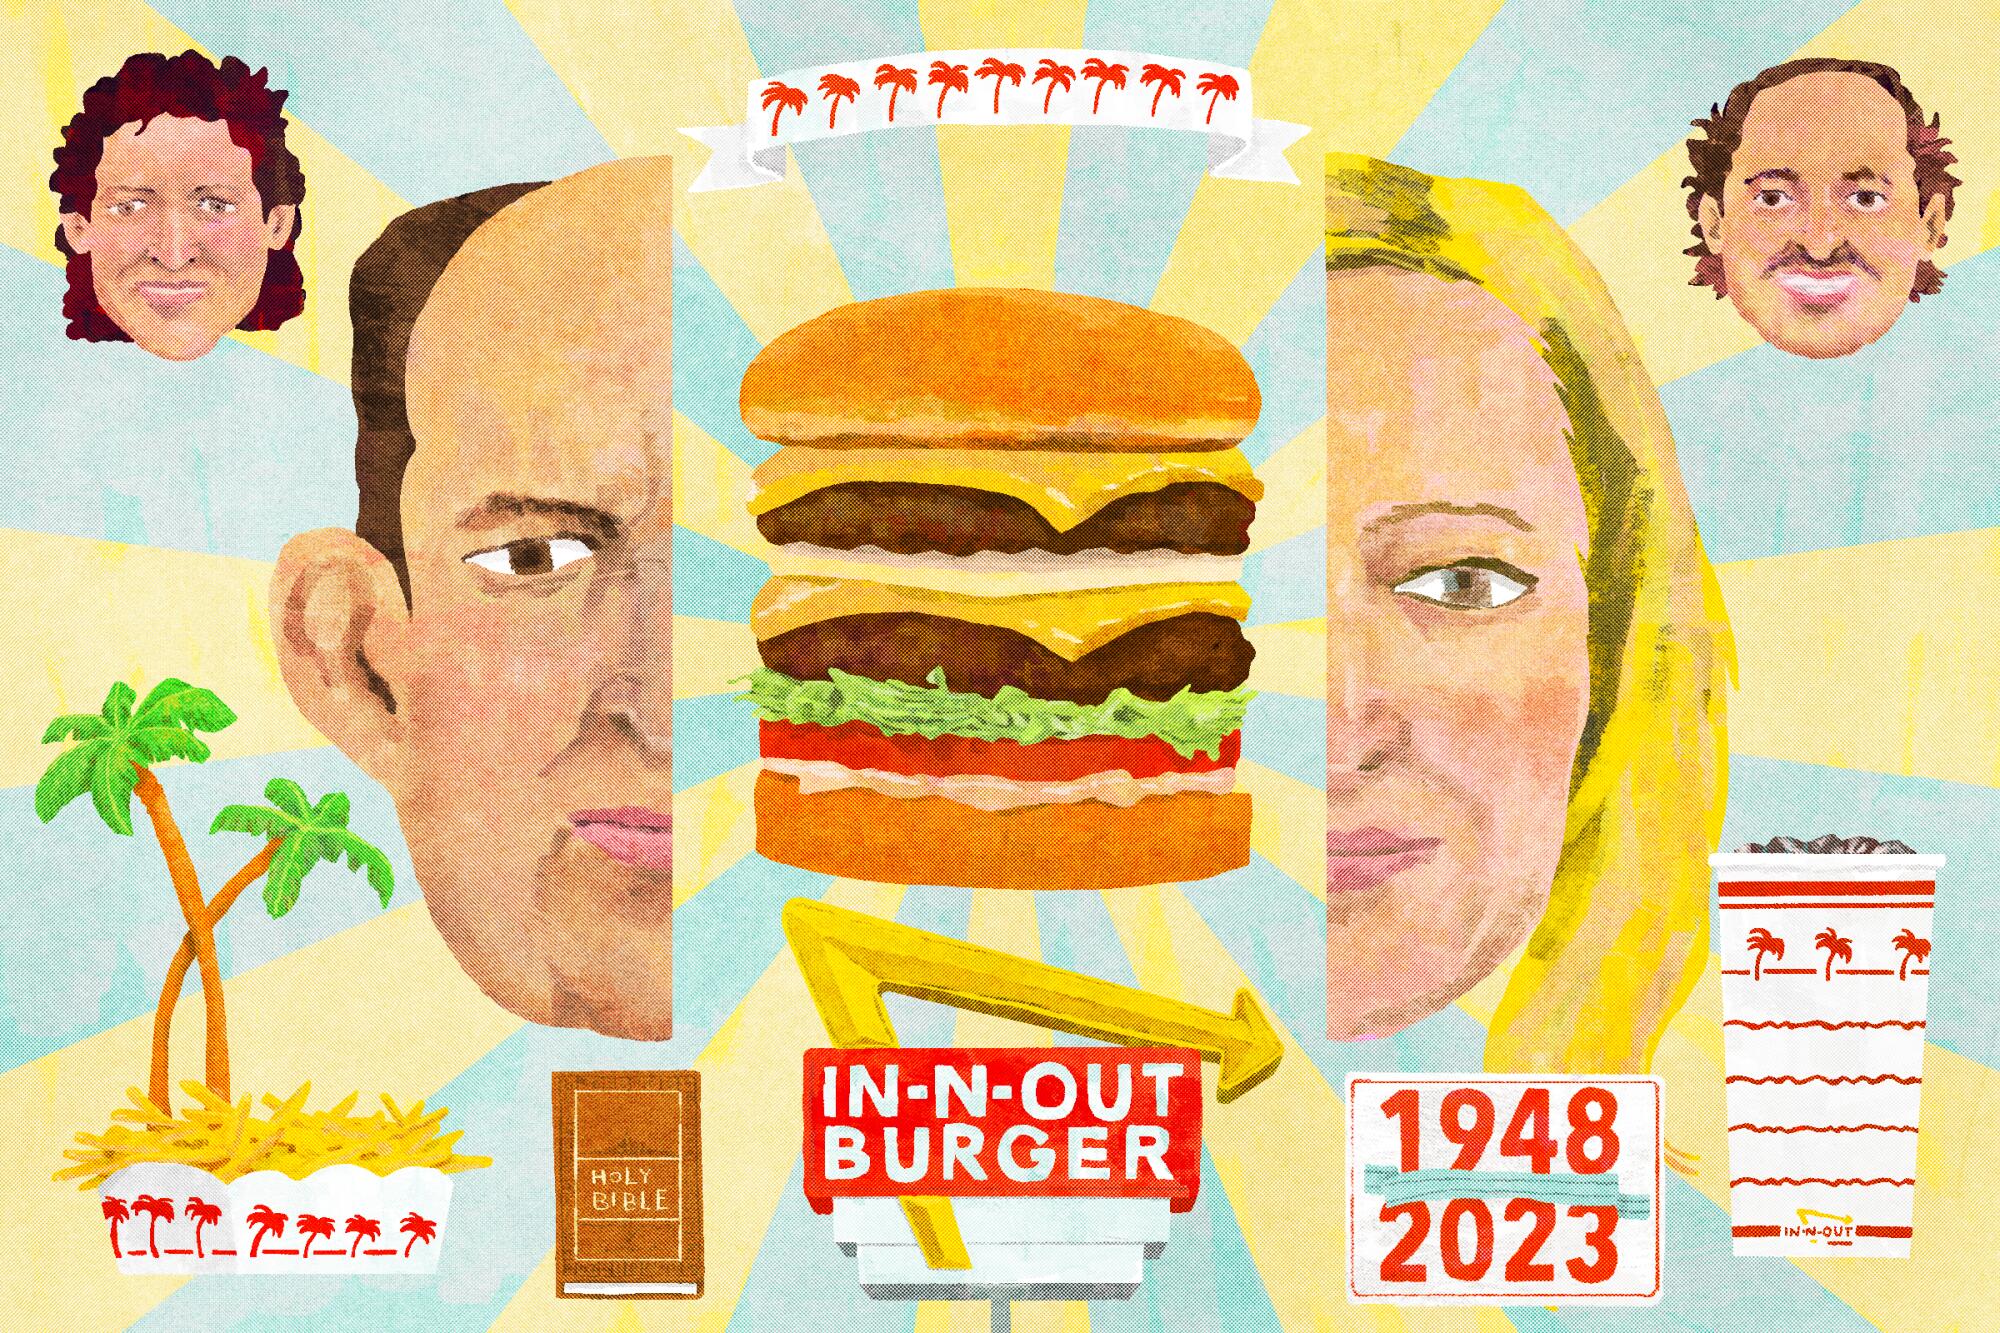 Illustration of In-n-Out burger surrounded by its founder and CEOs